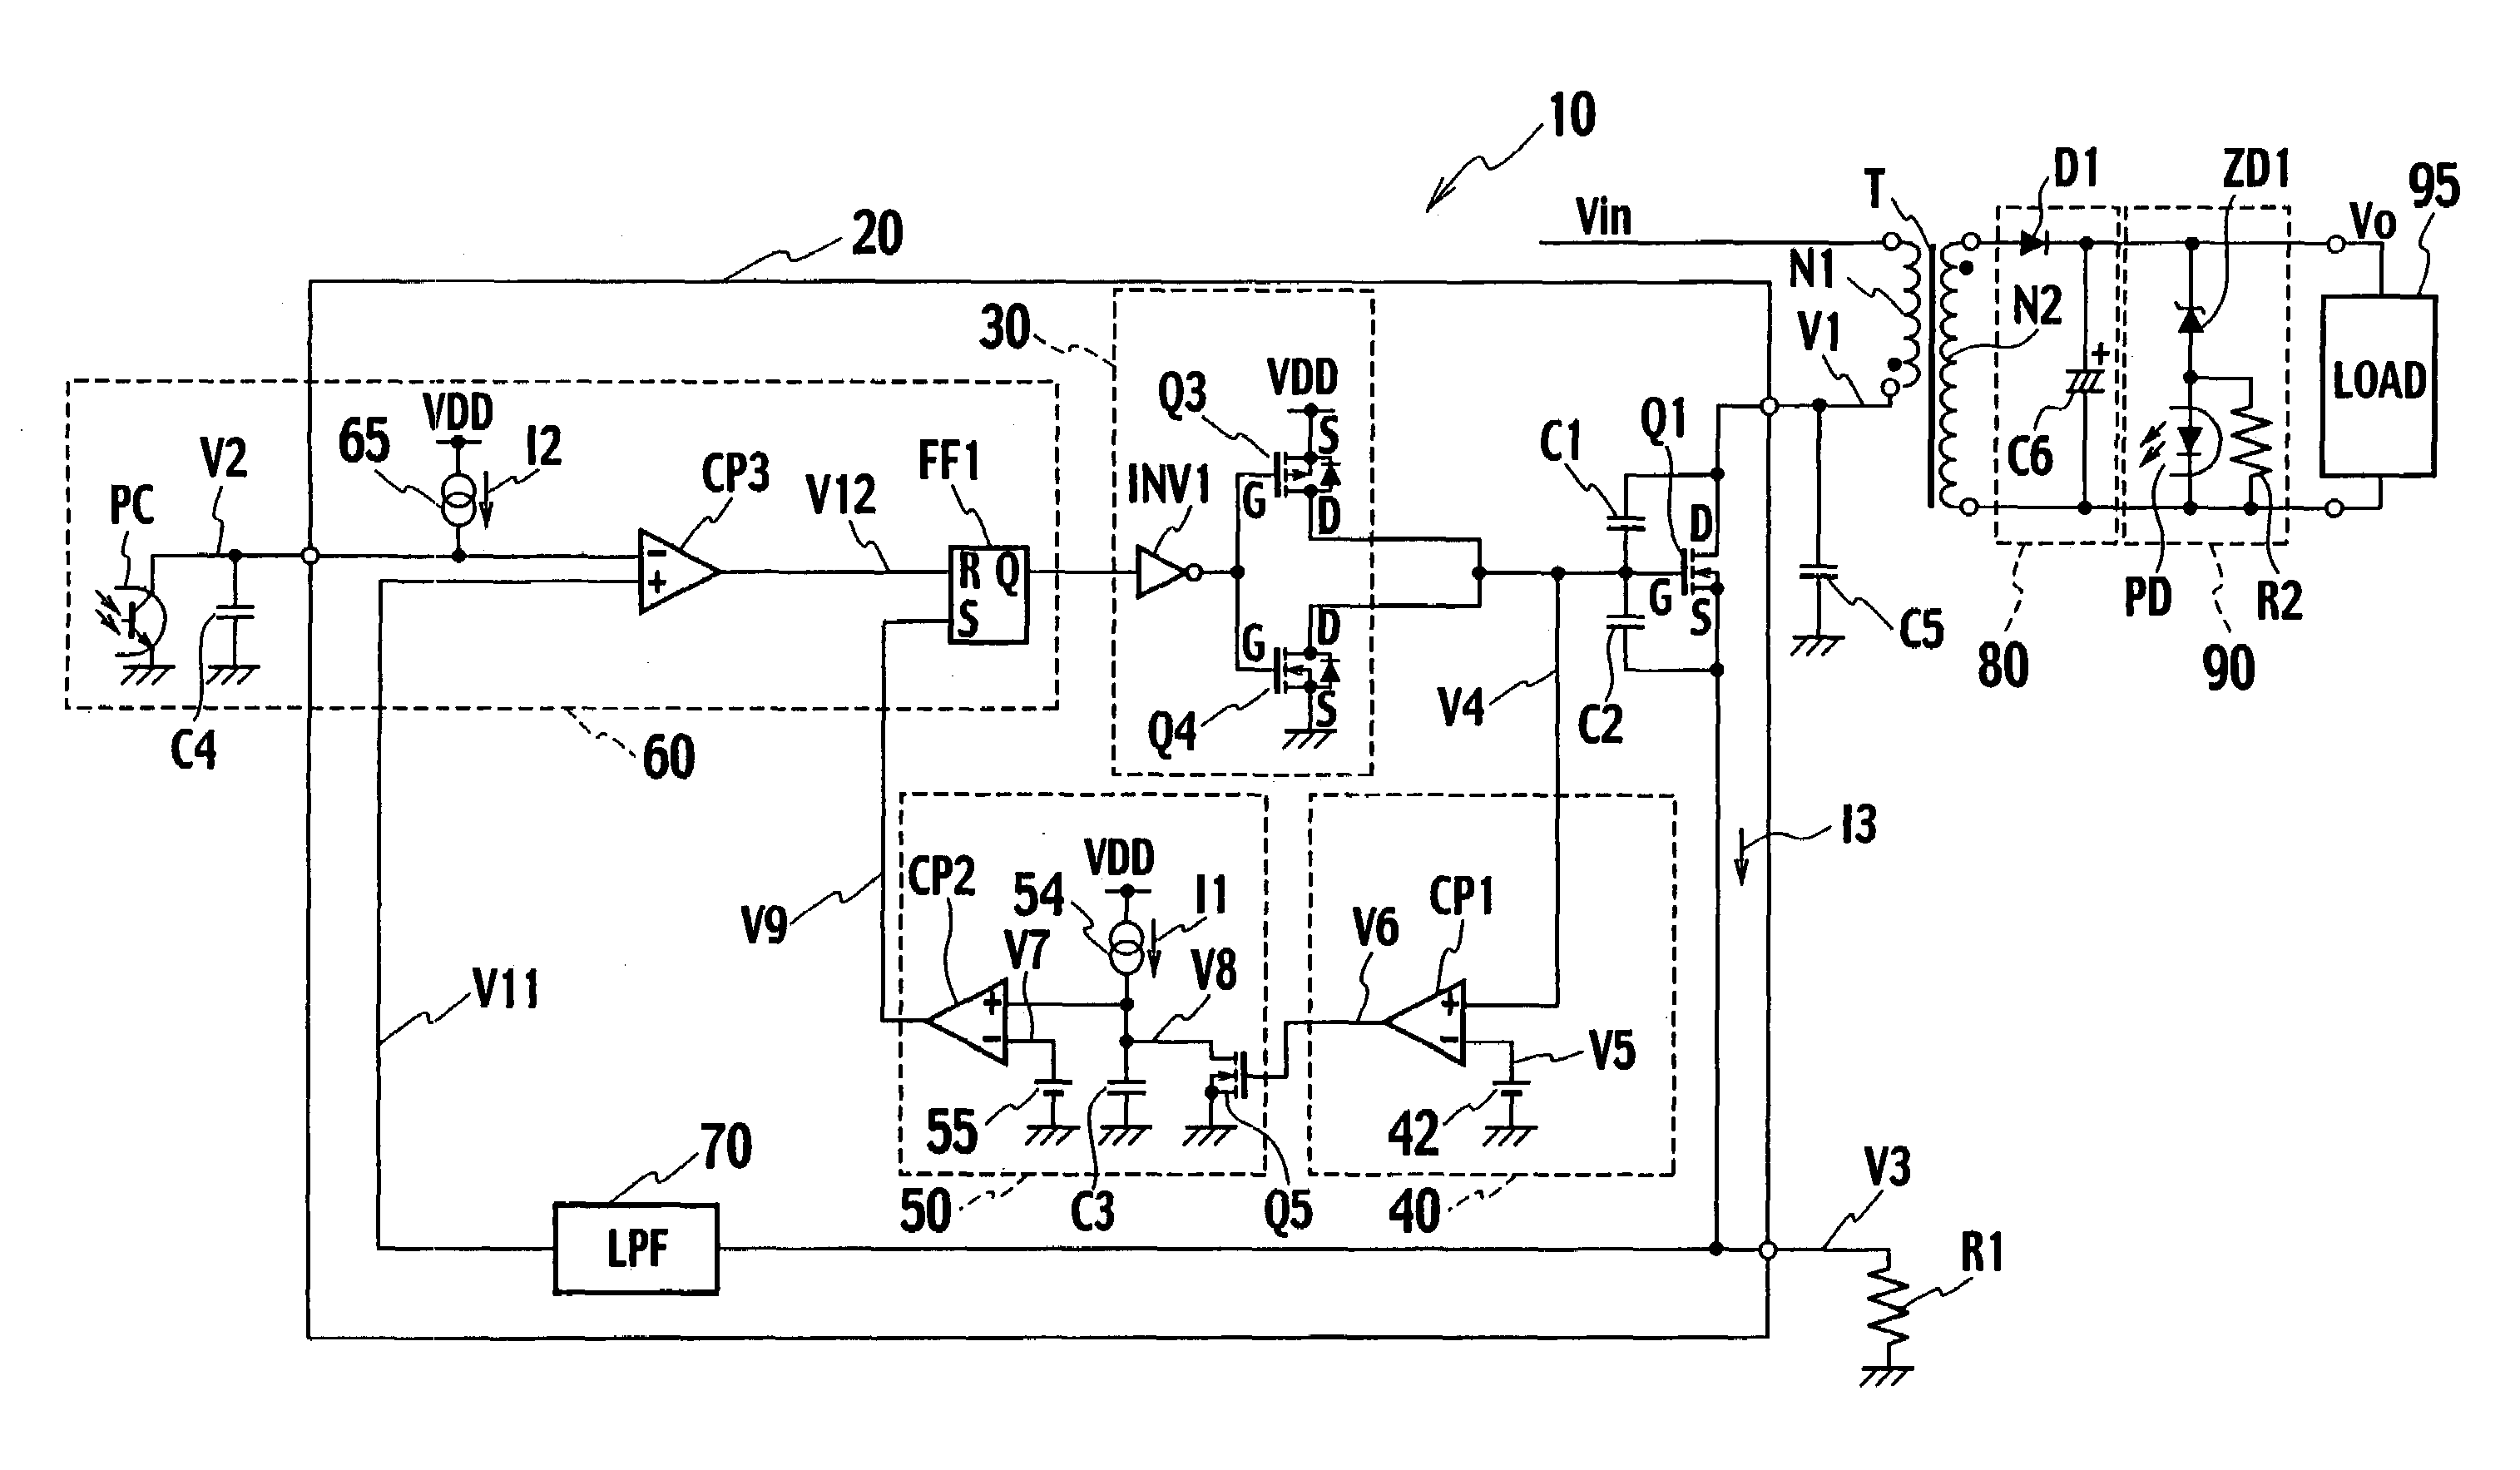 Switching power source apparatus with voltage gate detector for the switch